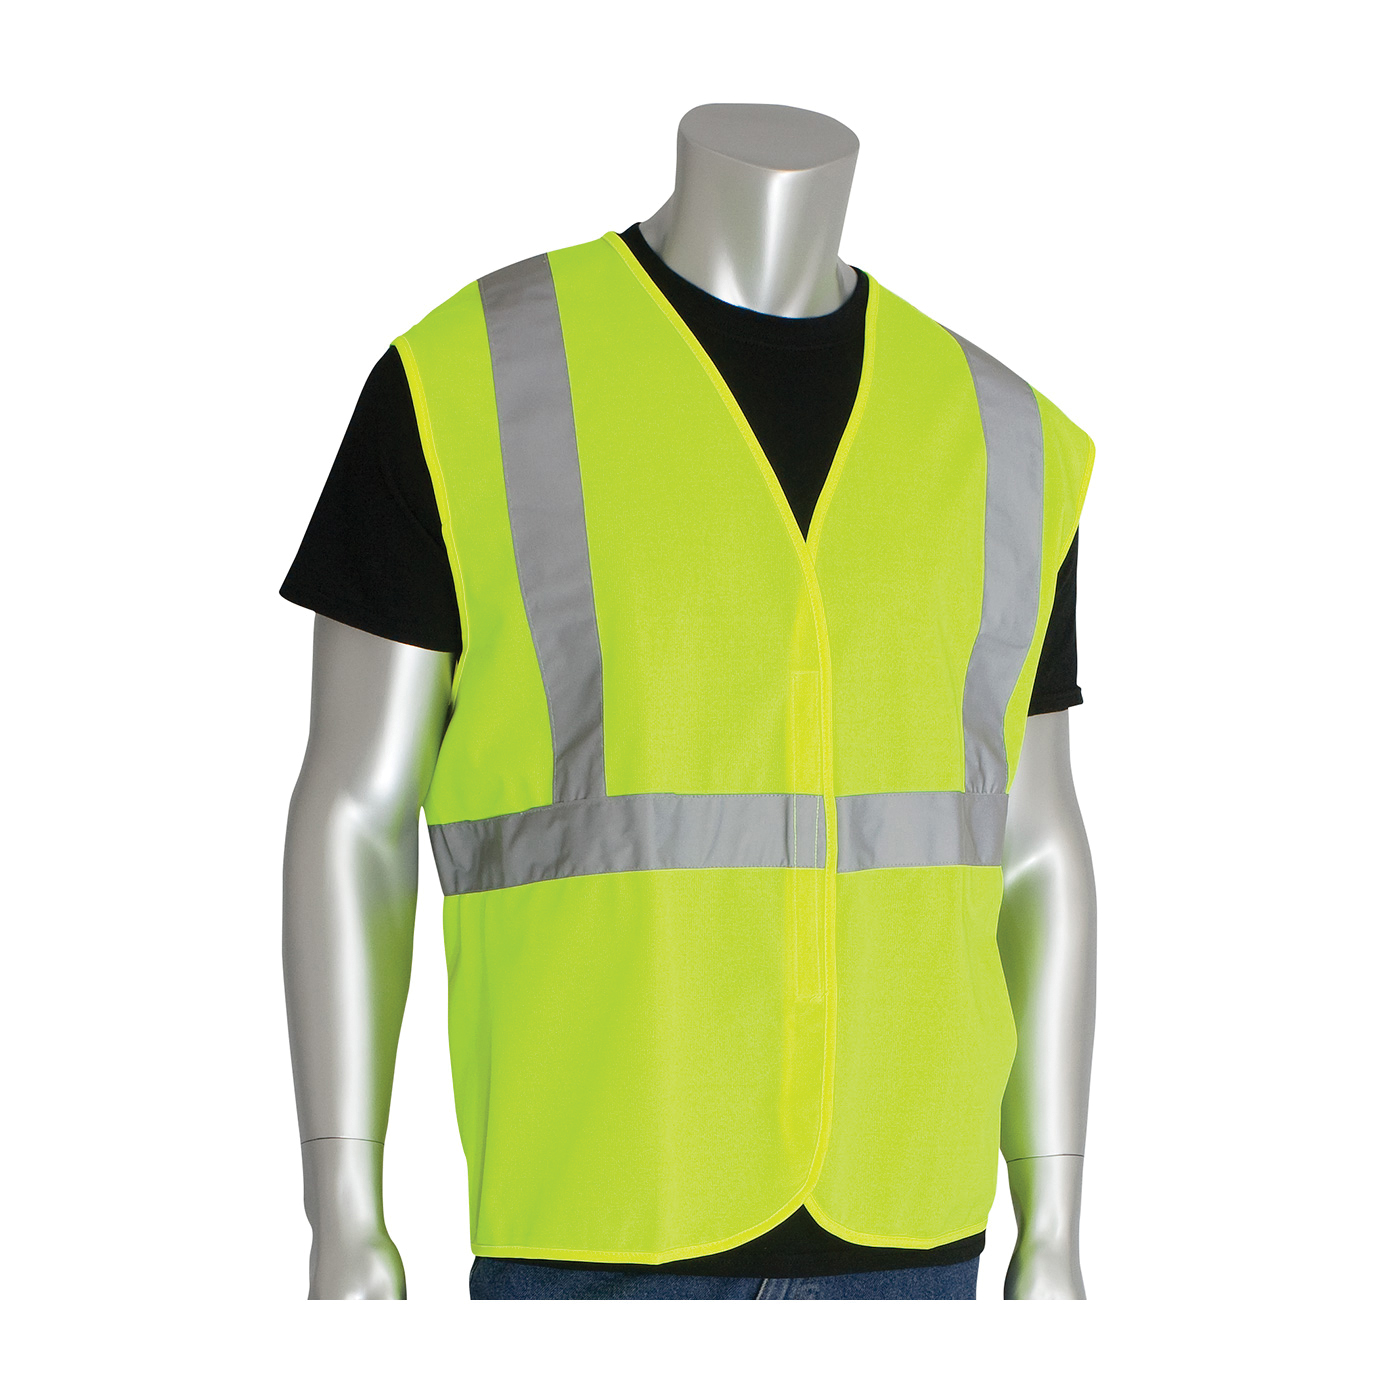 PIP® 302-WCENGLY-4X Solid Vest, 4XL, Hi-Viz Lime Yellow, Polyester, Hook and Loop Closure, ANSI Class: Class 2, Specifications Met: ANSI 107 Type R